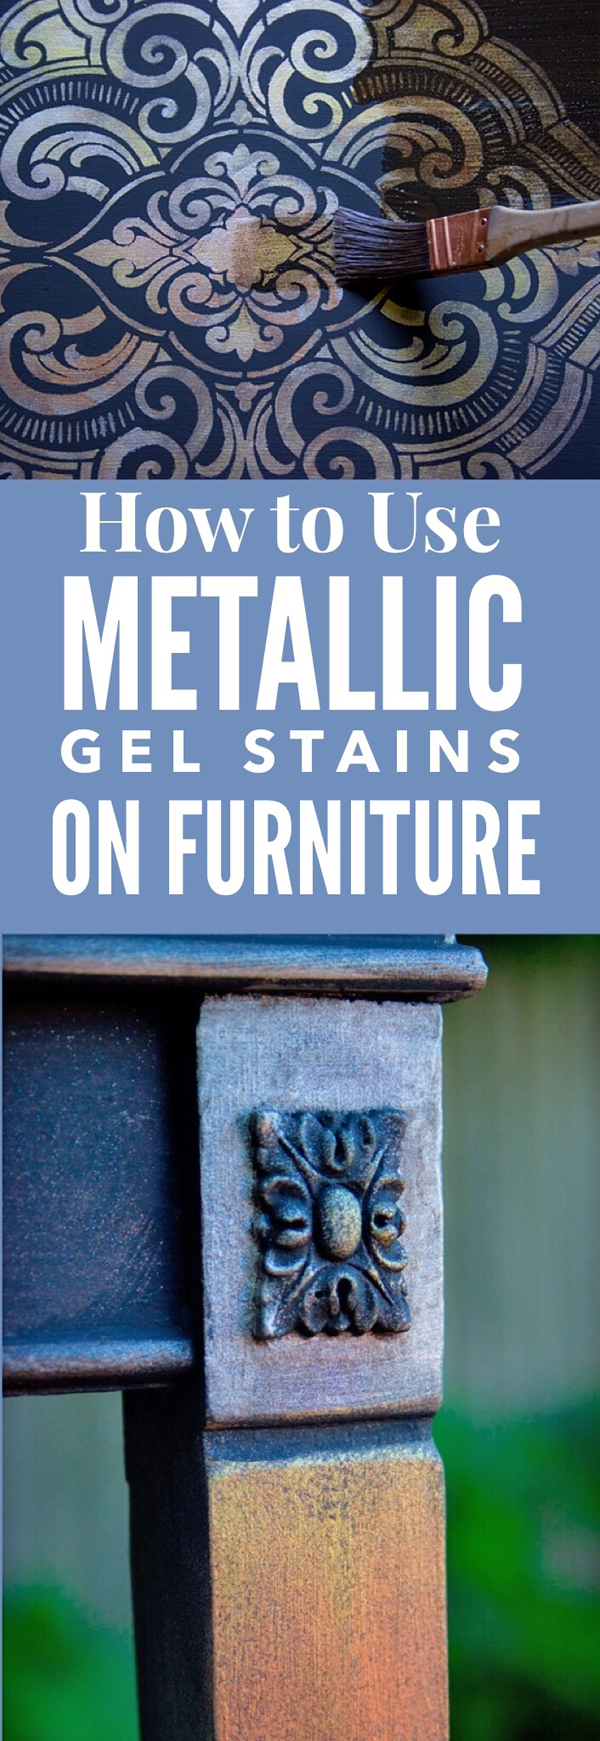 How to Use Metallic Gel Stains on Furniture